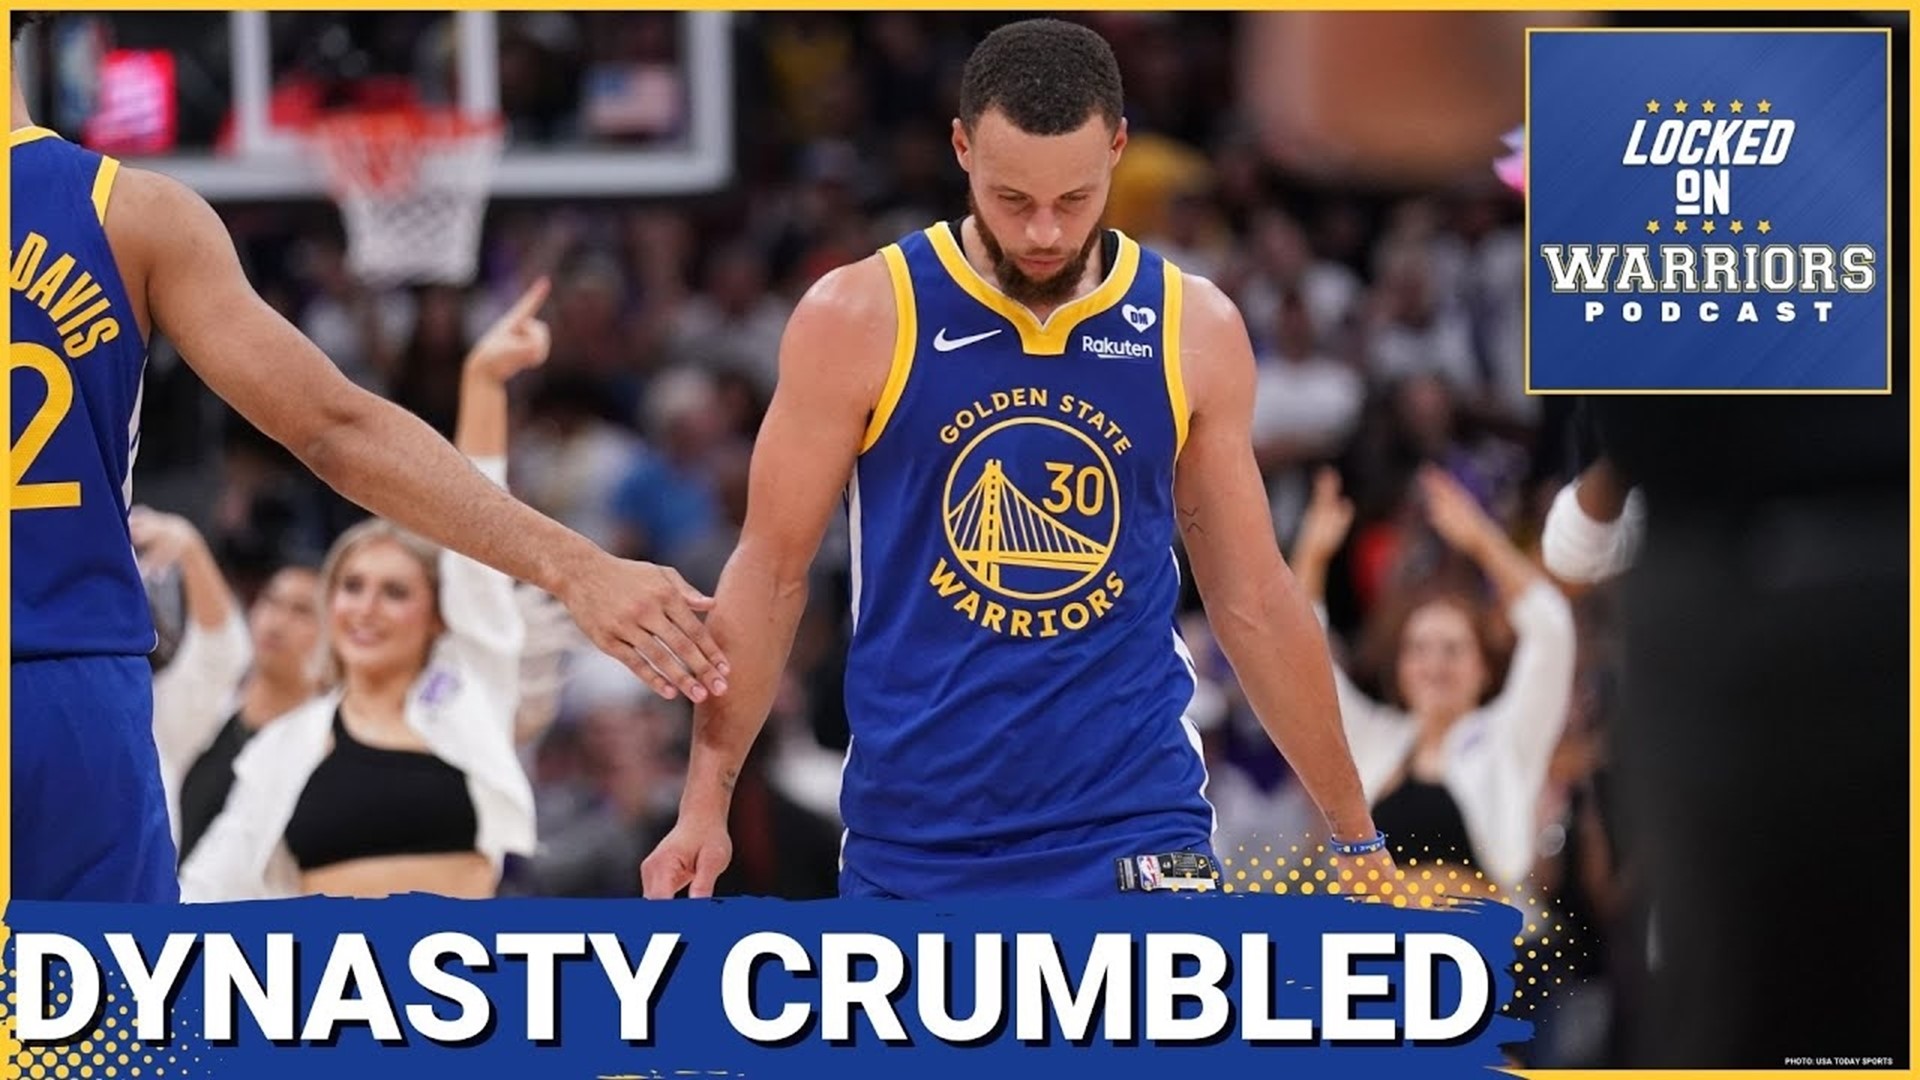 Cyrus Saatsaz goes live for a doom and gloom episode to recap the Golden State Warriors season and Dynasty crumbling following a disastrous Play-In performance.